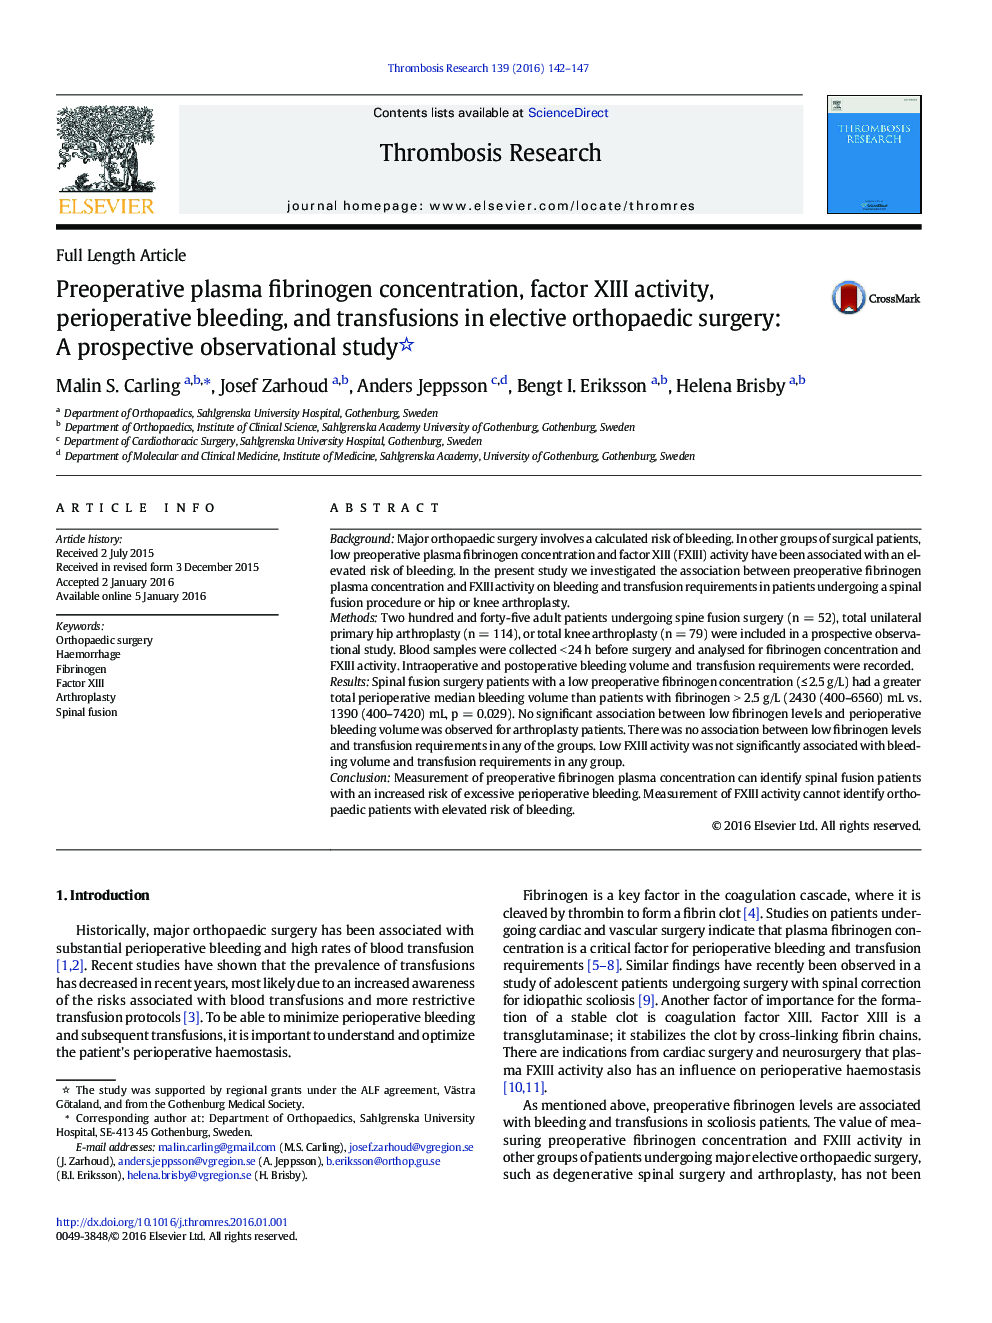 Preoperative plasma fibrinogen concentration, factor XIII activity, perioperative bleeding, and transfusions in elective orthopaedic surgery: A prospective observational study 